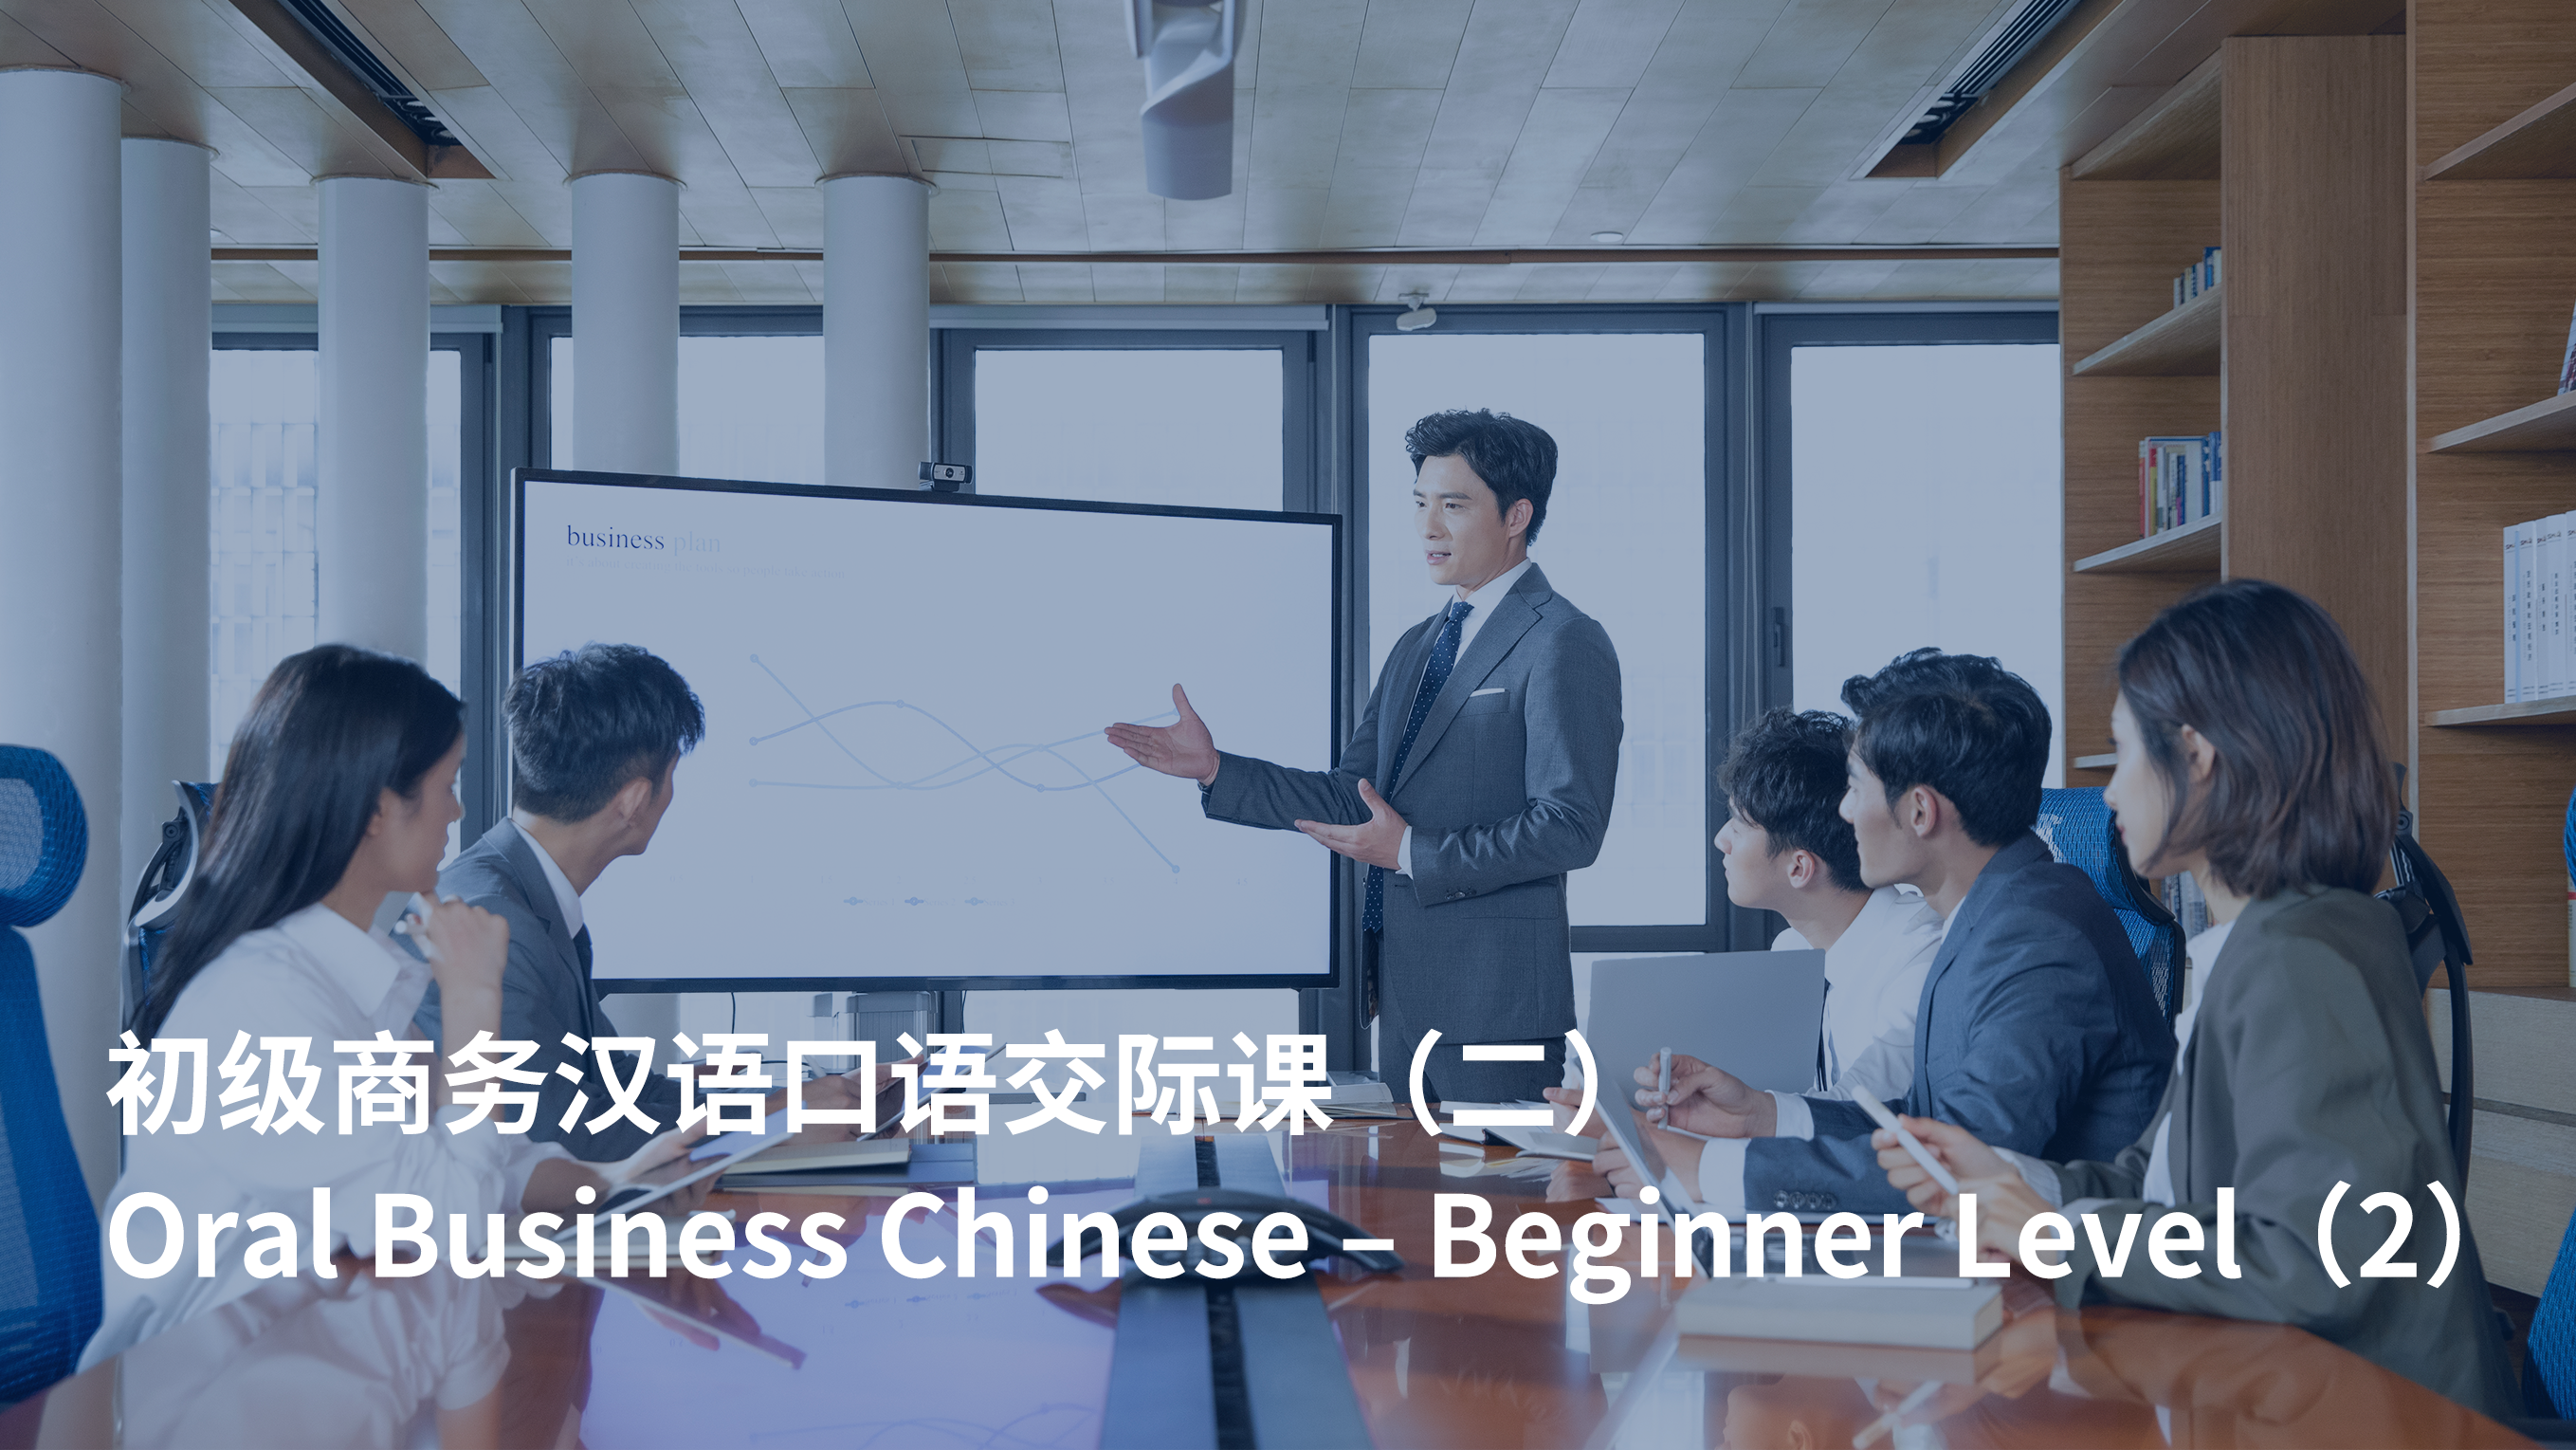 Oral Business Chinese – Beginner Level（2）